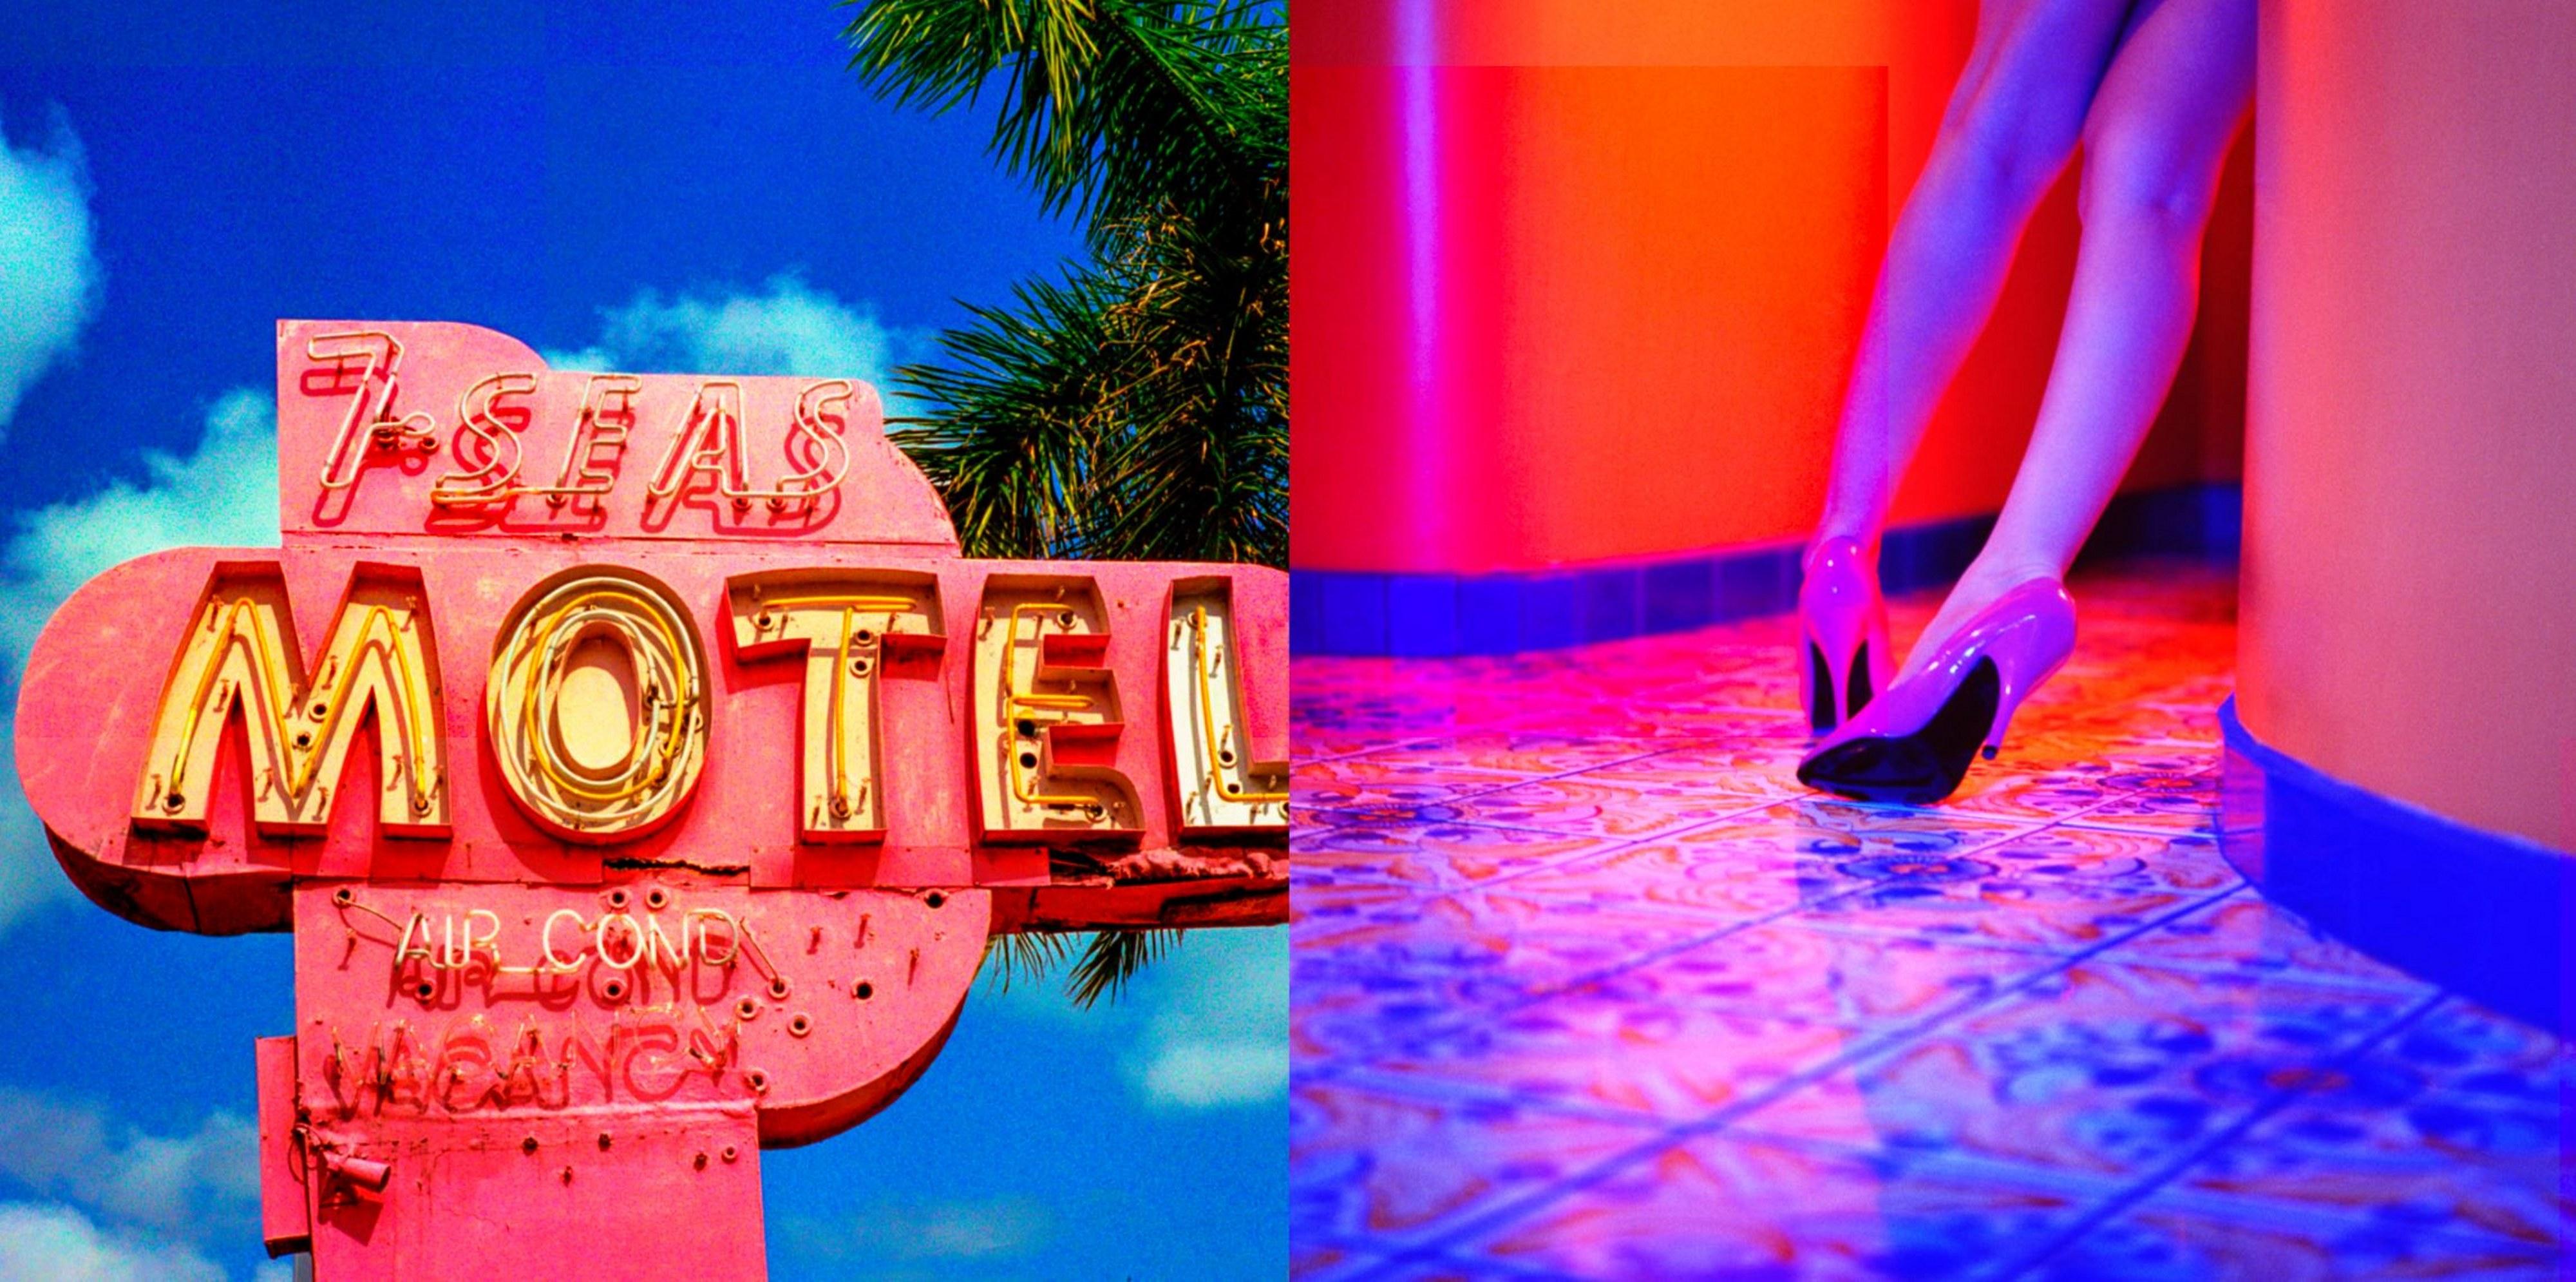 Guido Argentini Color Photograph - Diptych: The umberable lightness - woman with high heels and a motel sign